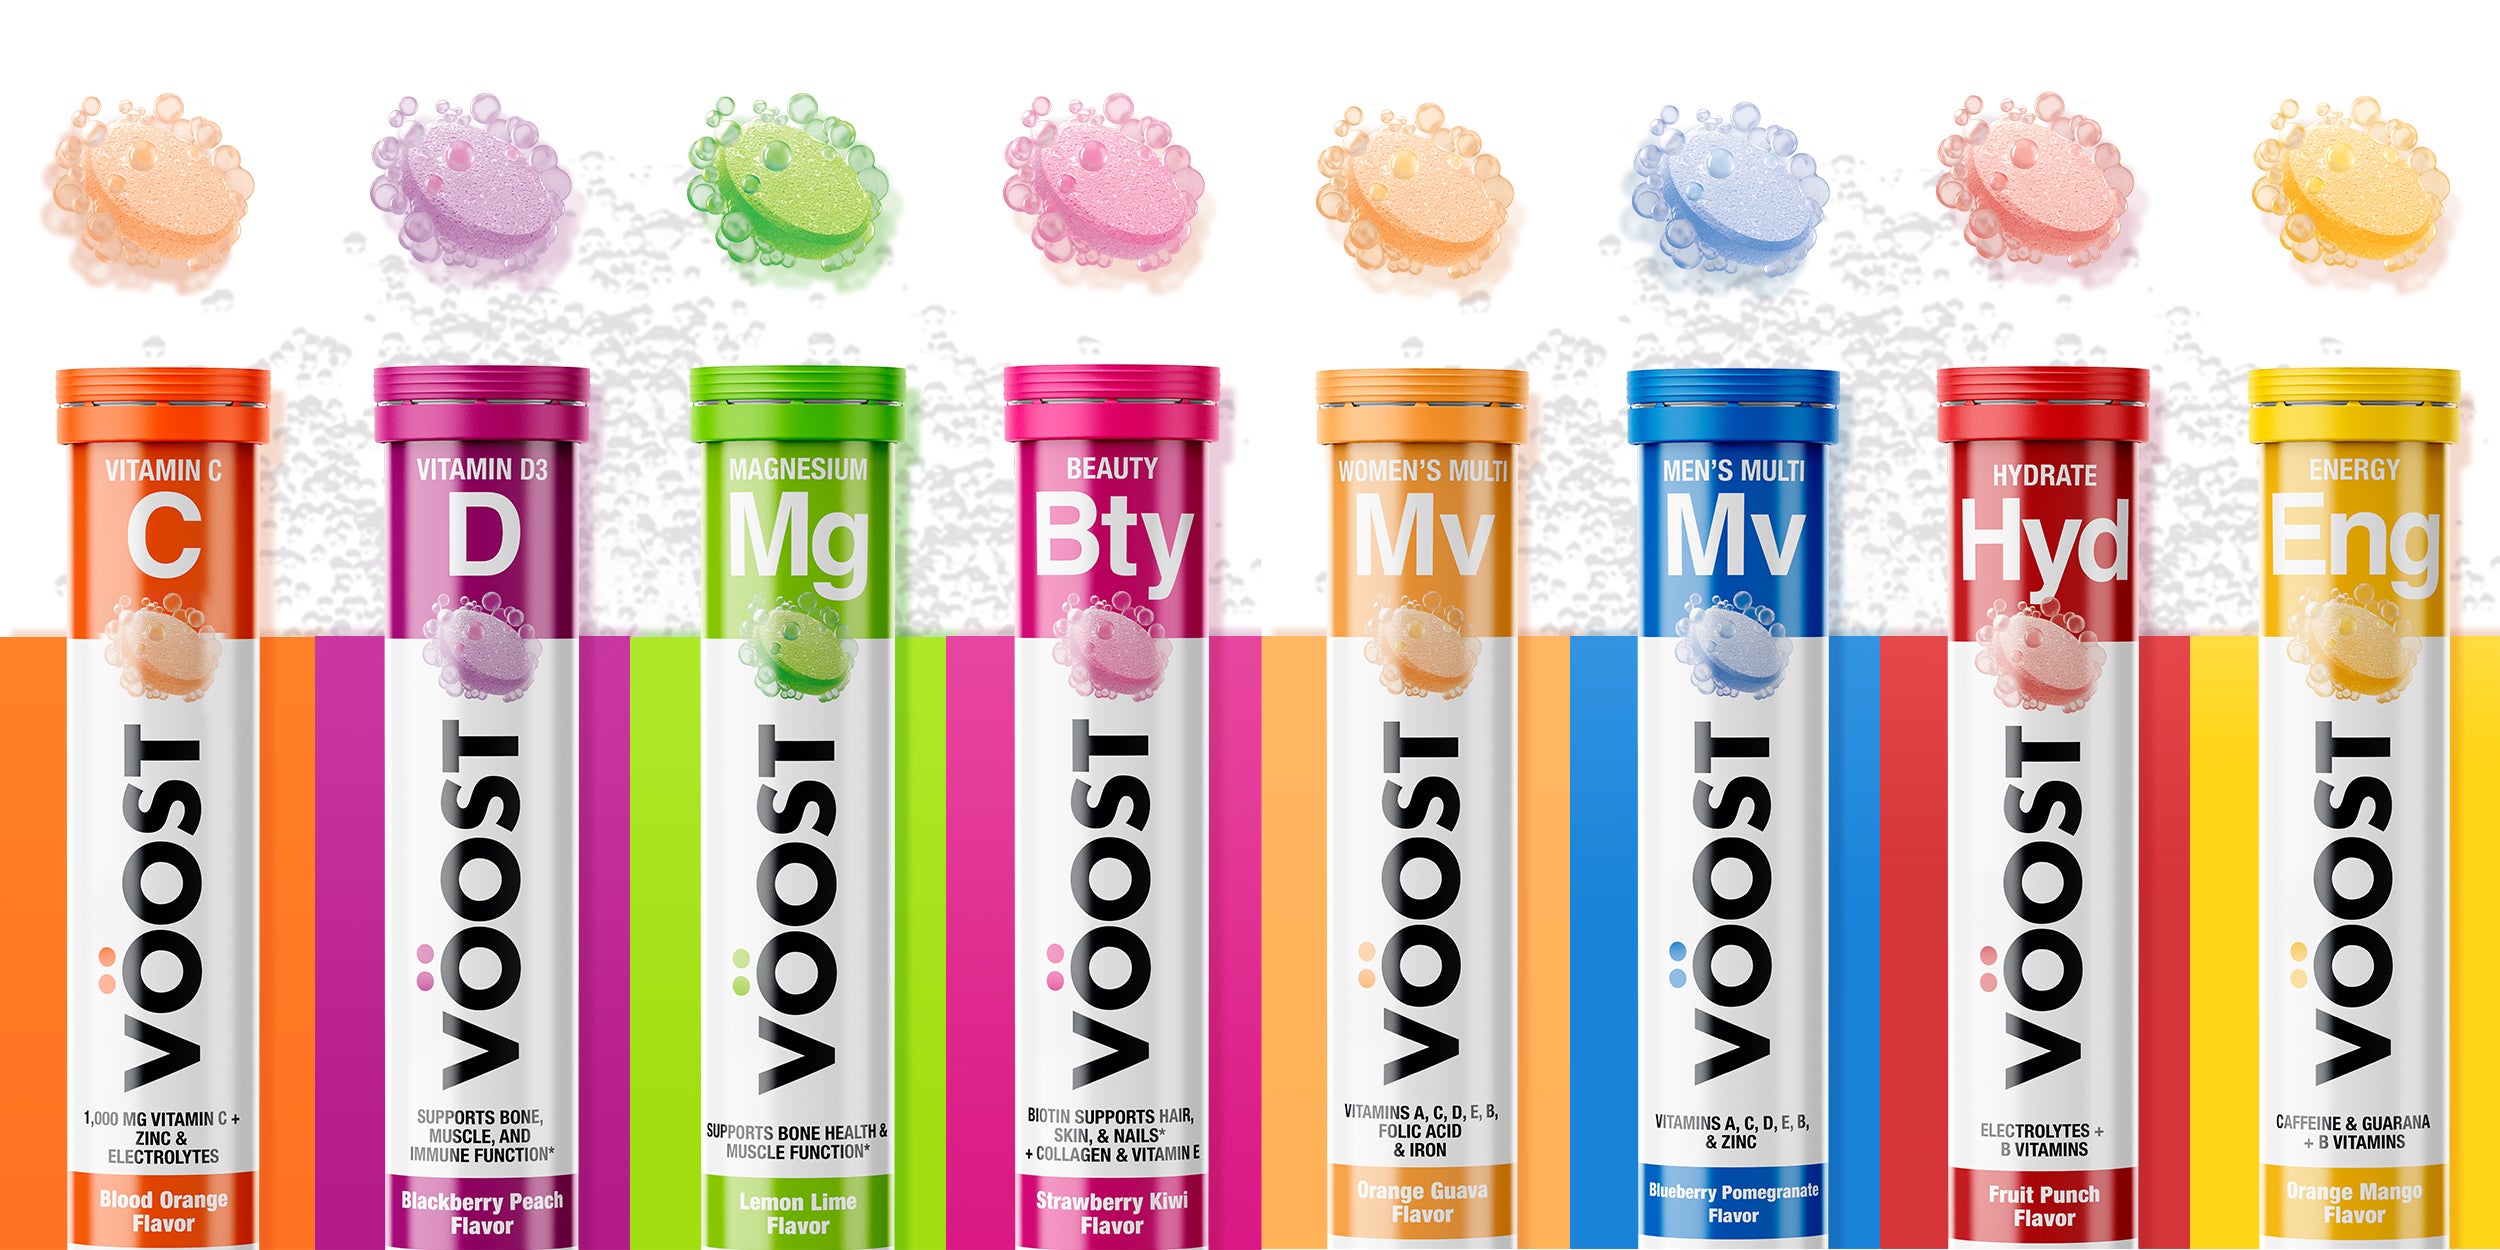 Meet VÖOST: The New Fizzy Vitamin That’s Reinventing Your Daily Supplement Experience